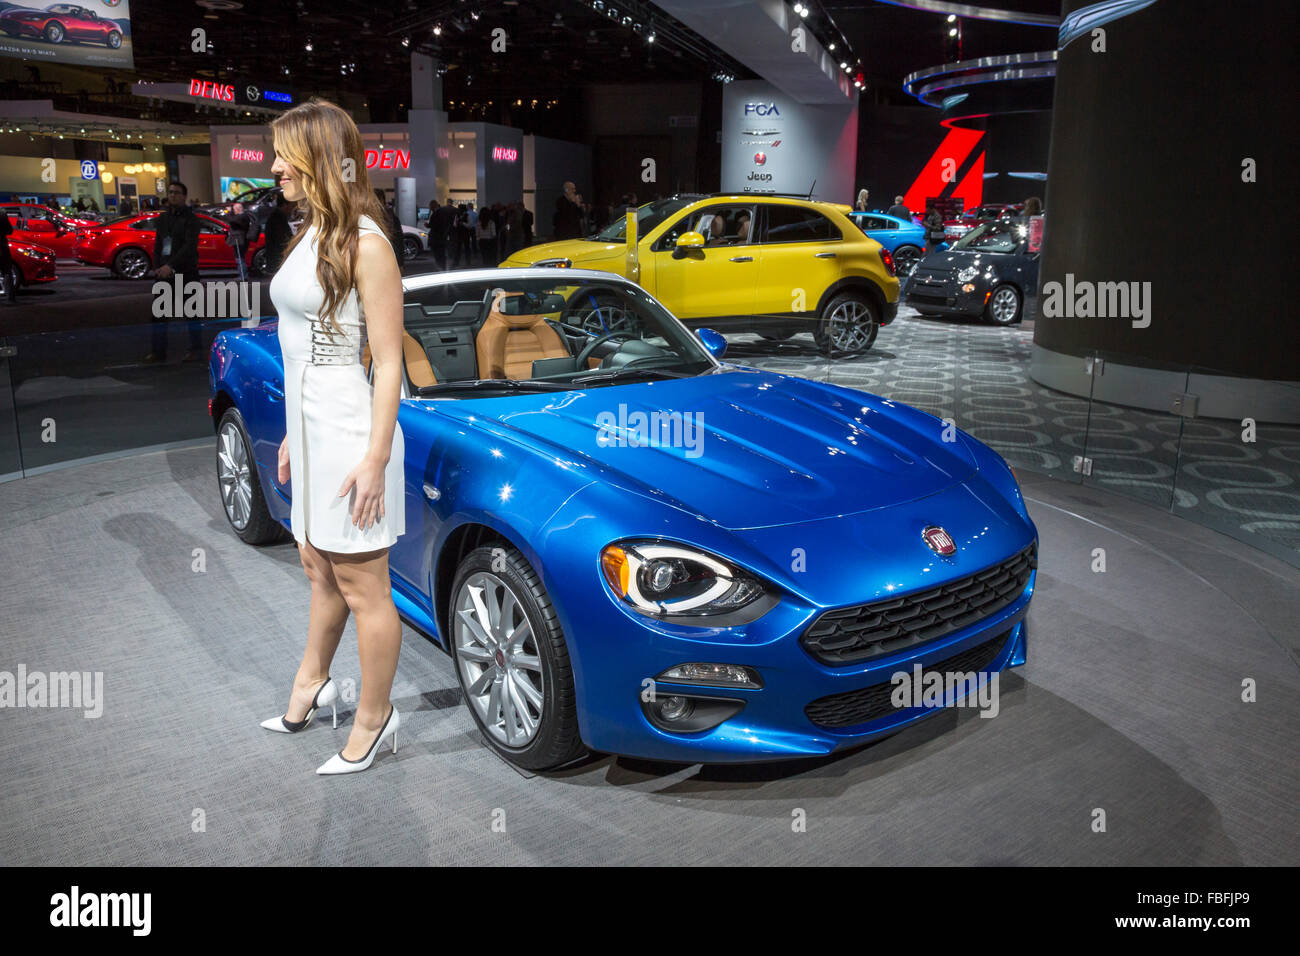 Detroit, Michigan - The Fiat 124 Spider on display at the North American International Auto Show. Stock Photo